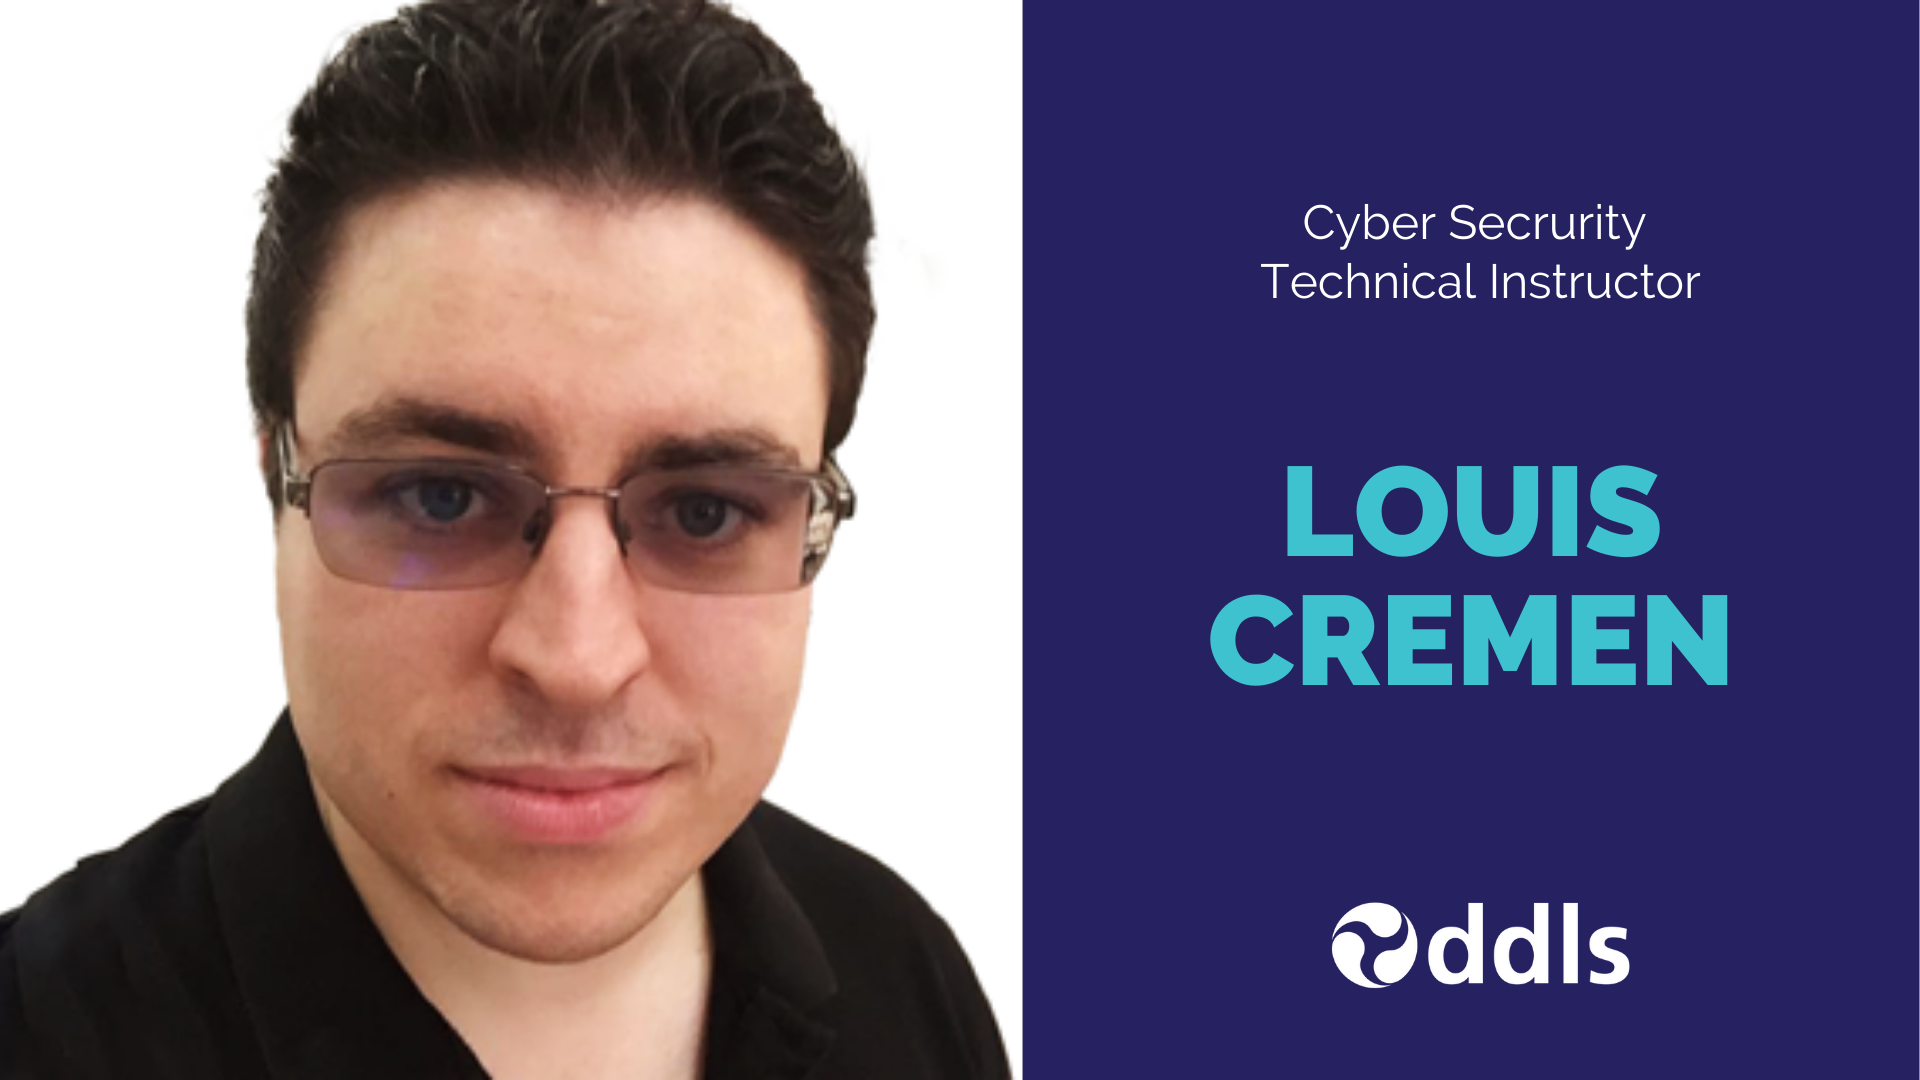 On hitting the road and learning from shared experiences with cyber security instructor Louis Cremen - Blog Image 1920 x 1080